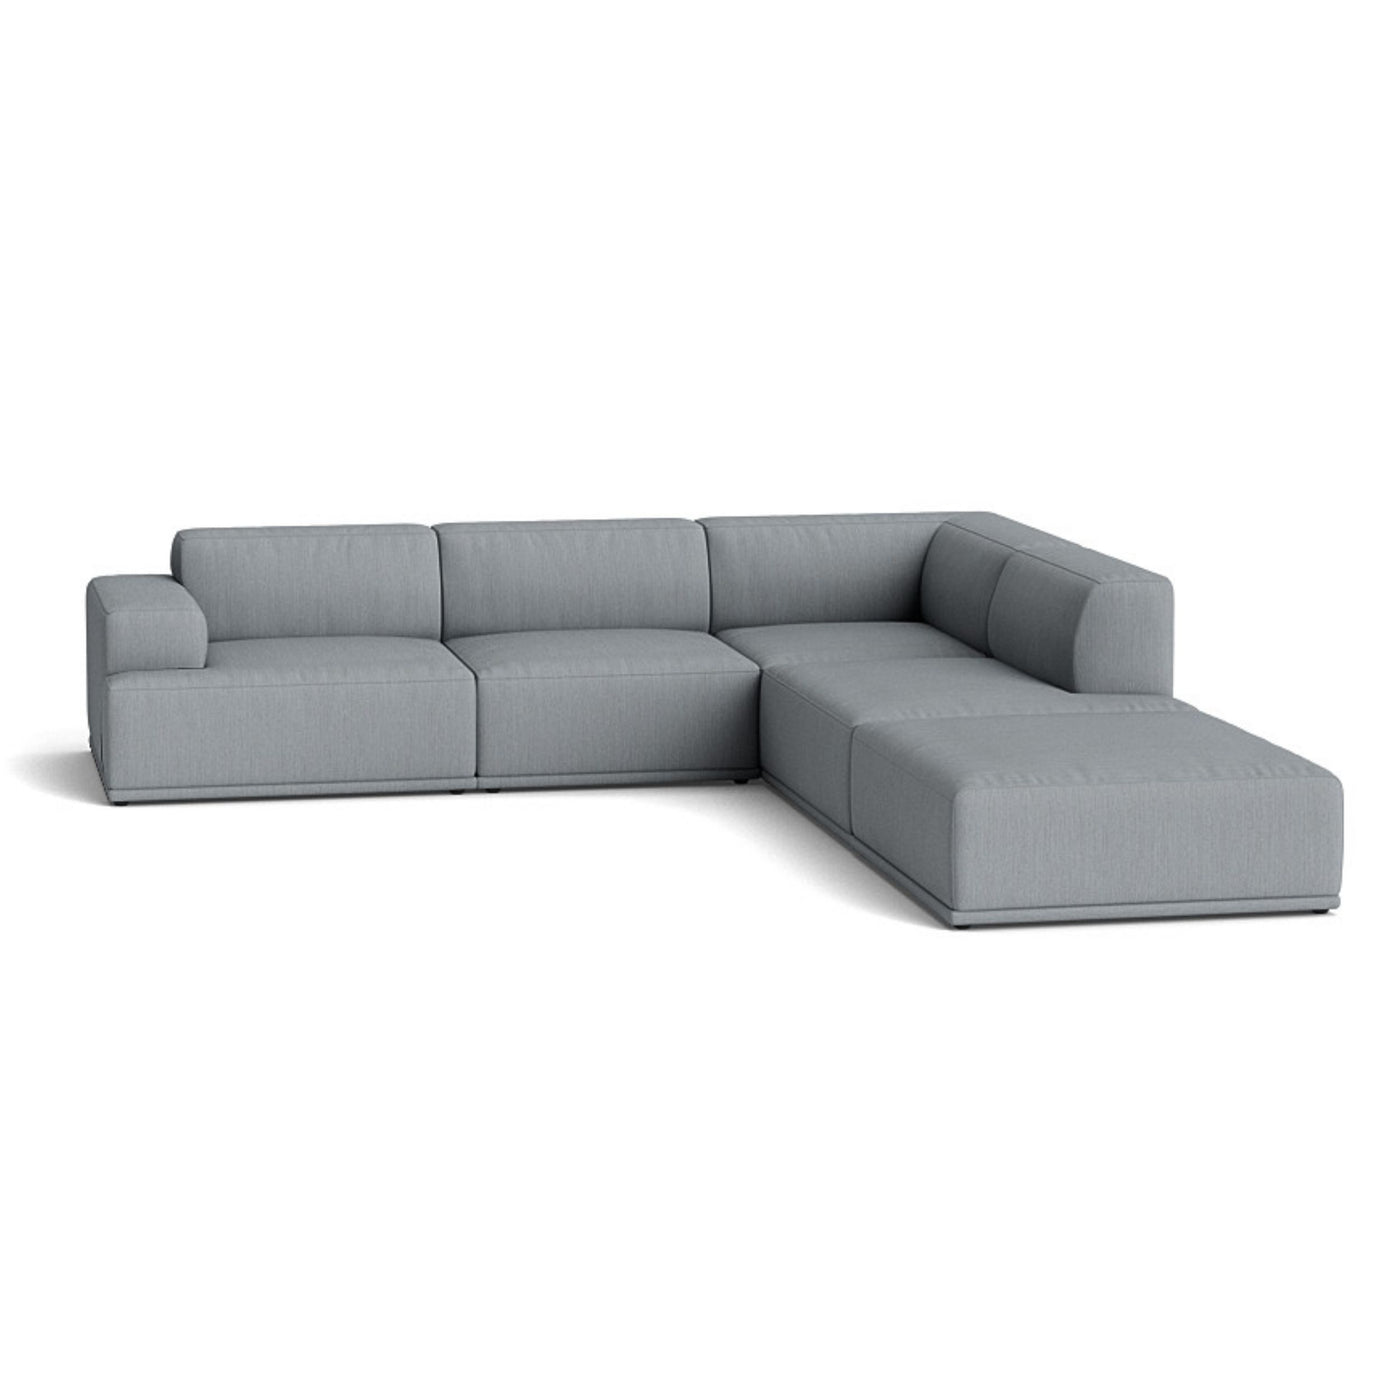 Muuto Connect Soft Modular Corner Sofa, configuration 2. Made-to-order from someday designs. #colour_balder-1775